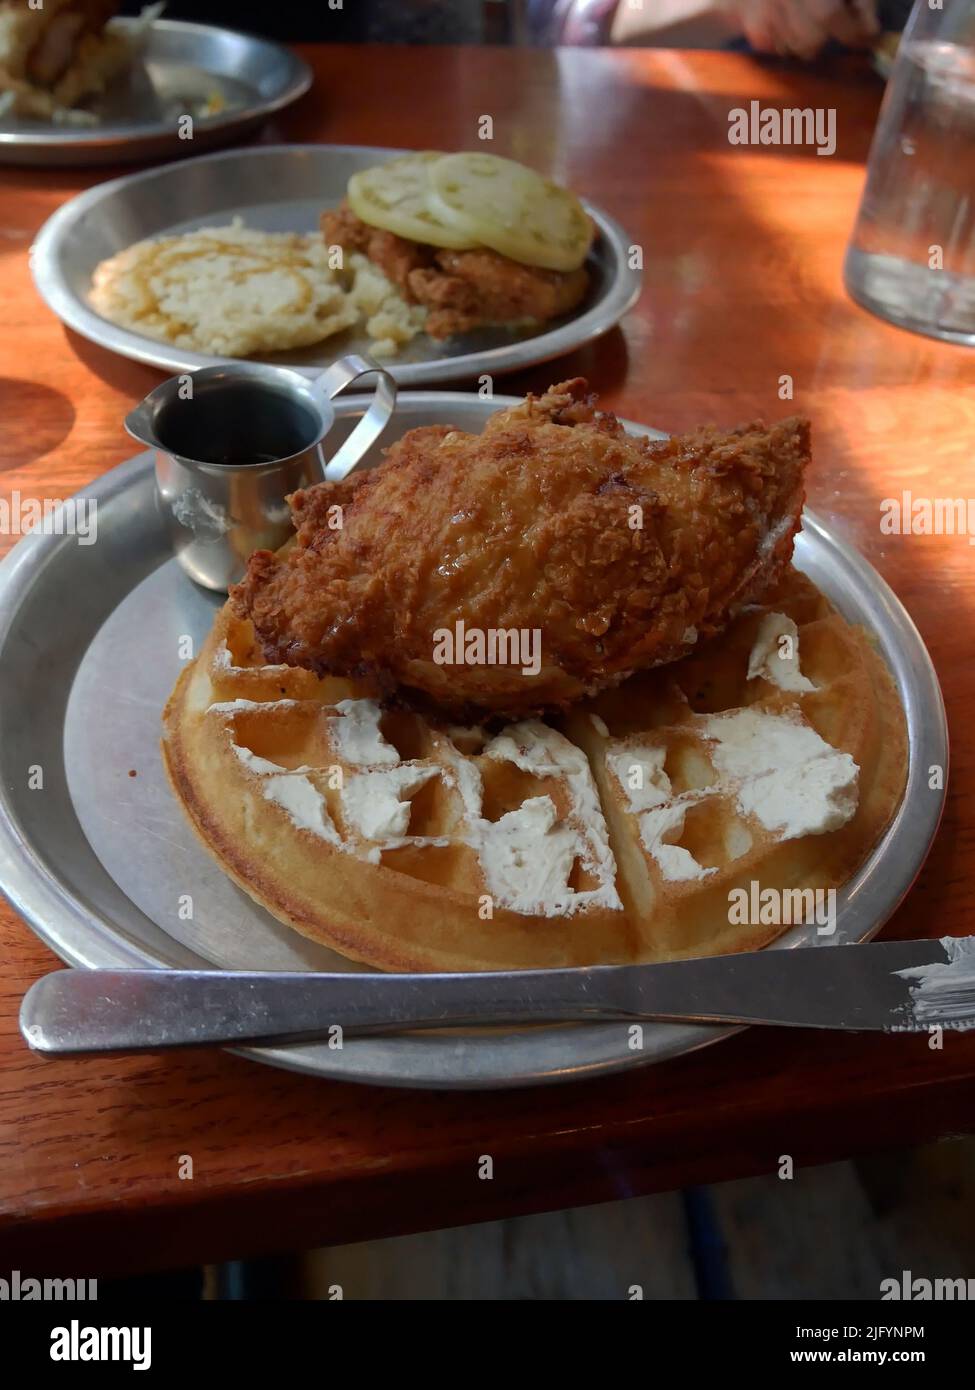 Fried chicken on a waffle. Stock Photo